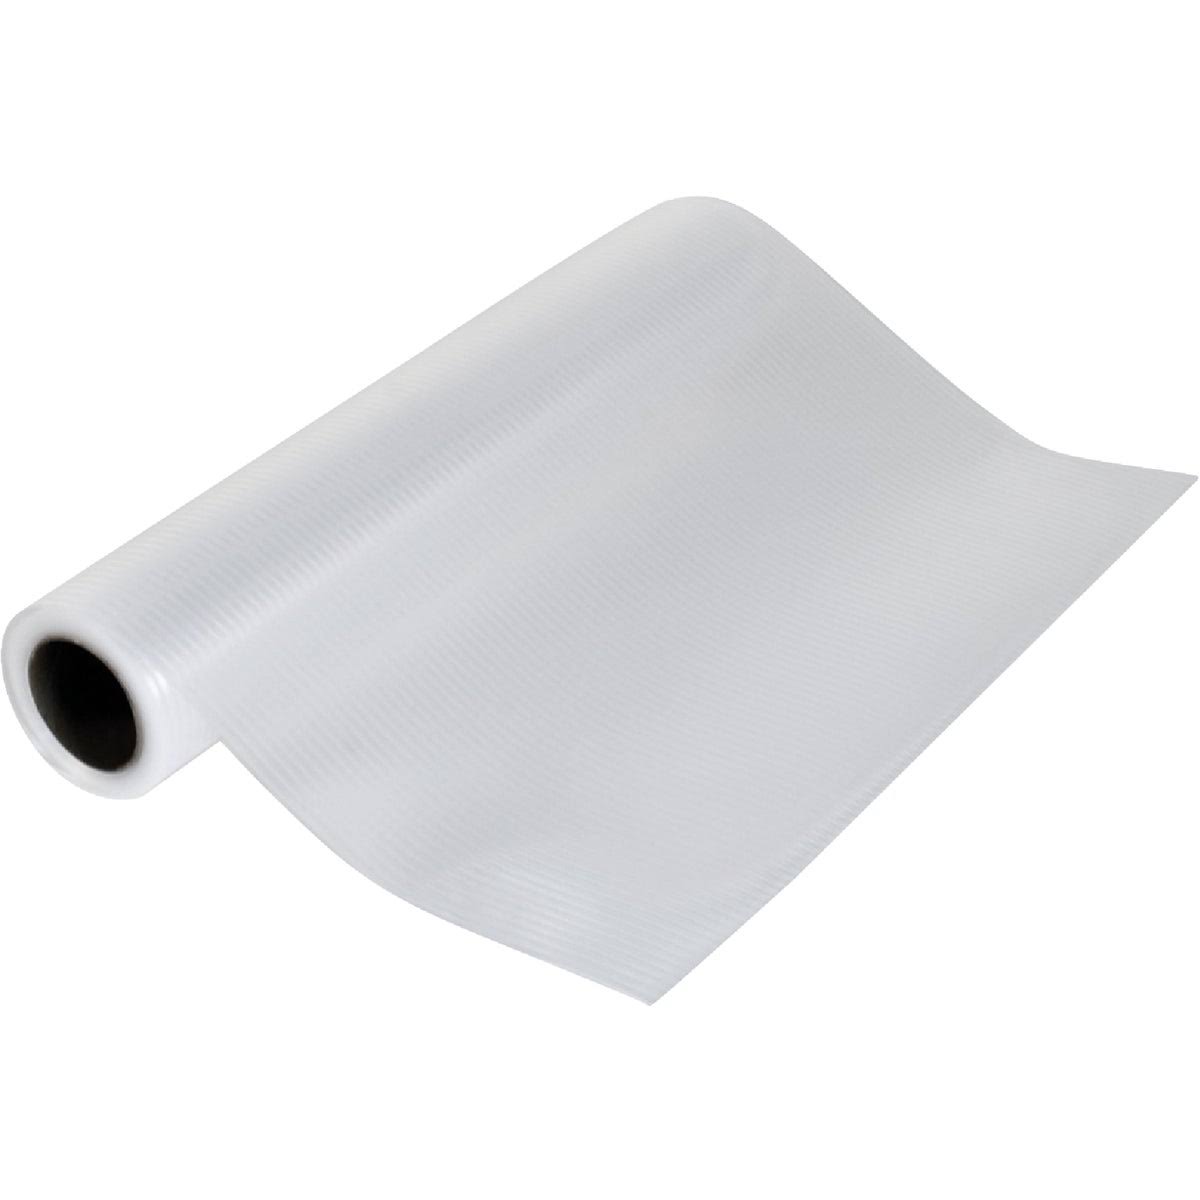 Con-Tact Nonadhesive Clear Ribbed Shelf Liner - 12" x 6'